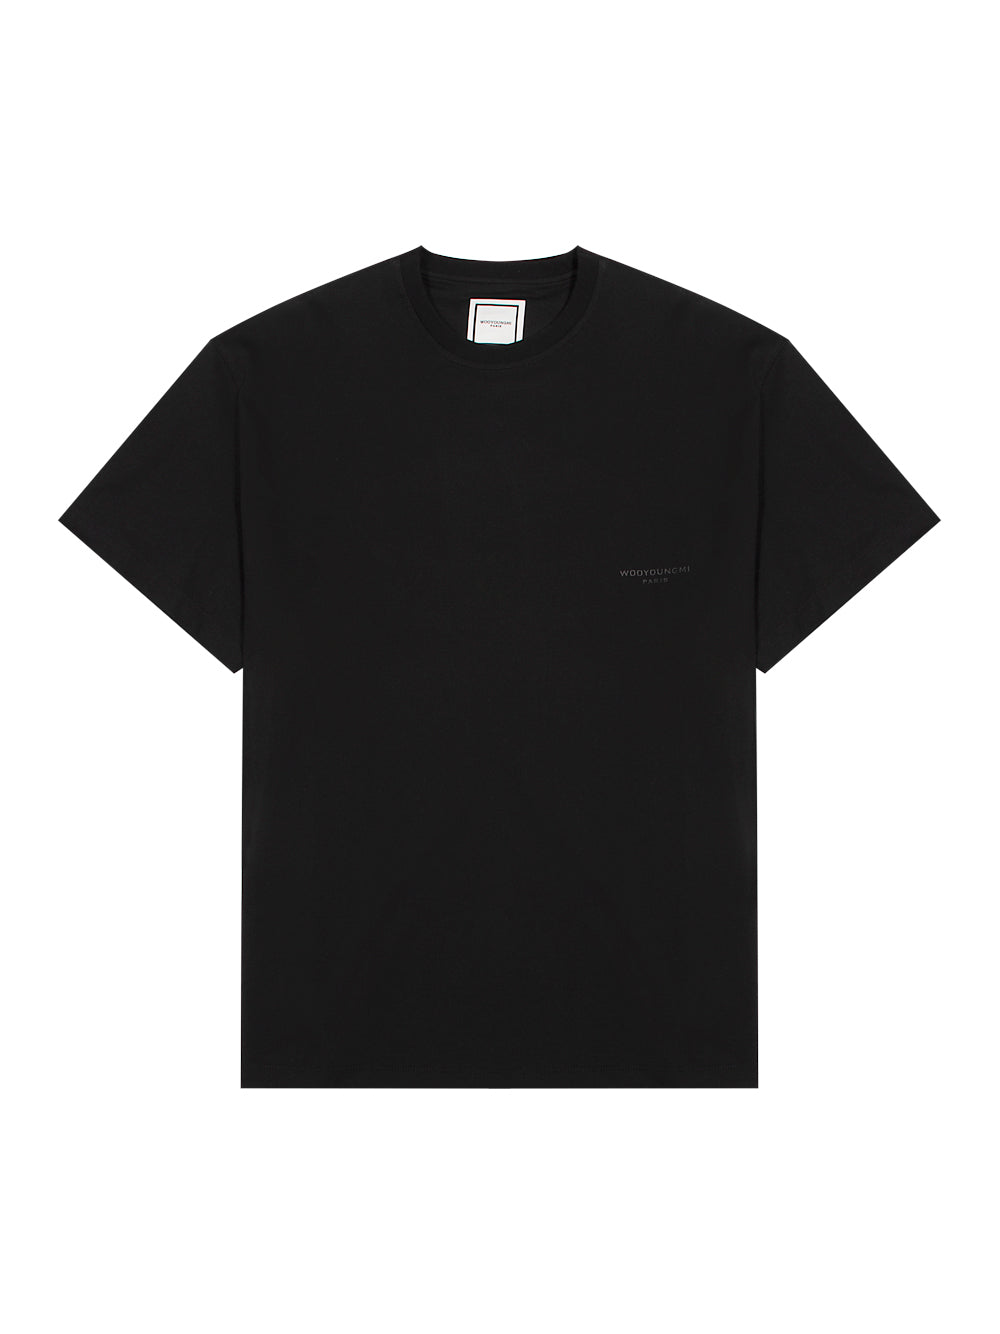 Leather Patch T-shirt Black